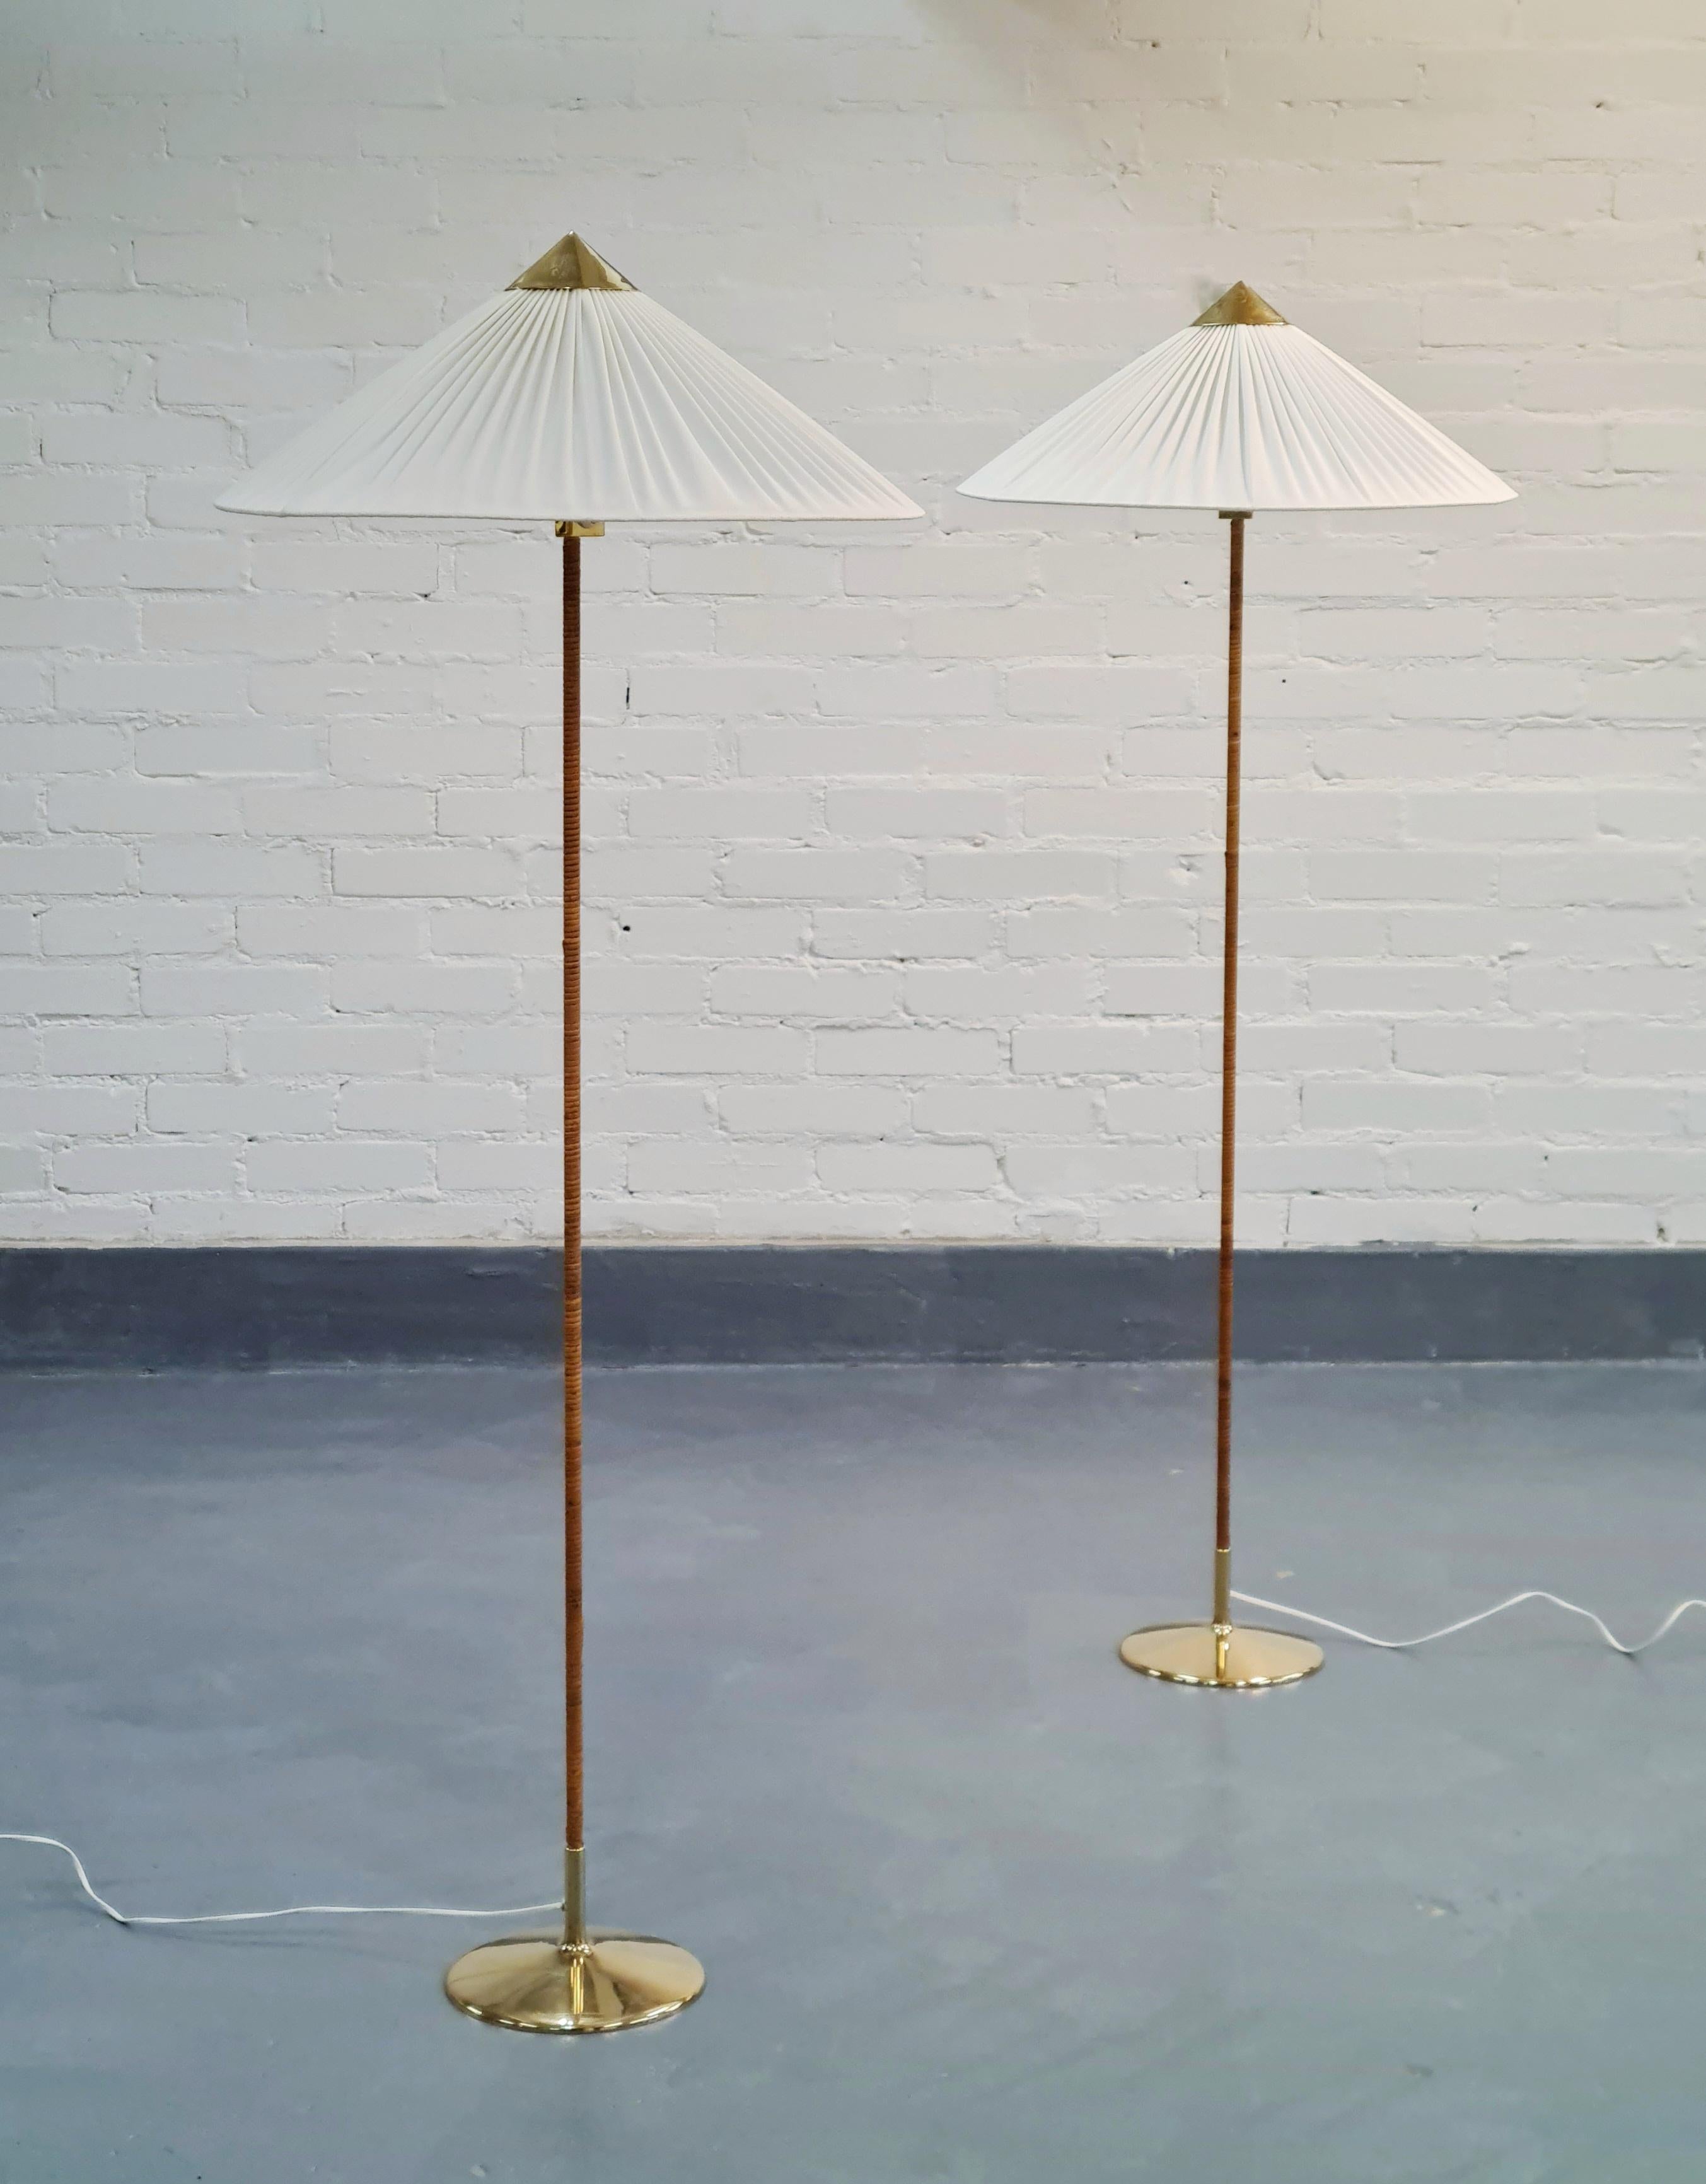 A beautiful pair of the highly sought after Paavo Tynell floor lamps model 9602 aka Chinese hat for Oy Taito Ab. 
This iconic floor lamp was originally designed by Paavo Tynell in the late 1930s and has been refined during the golden era of the